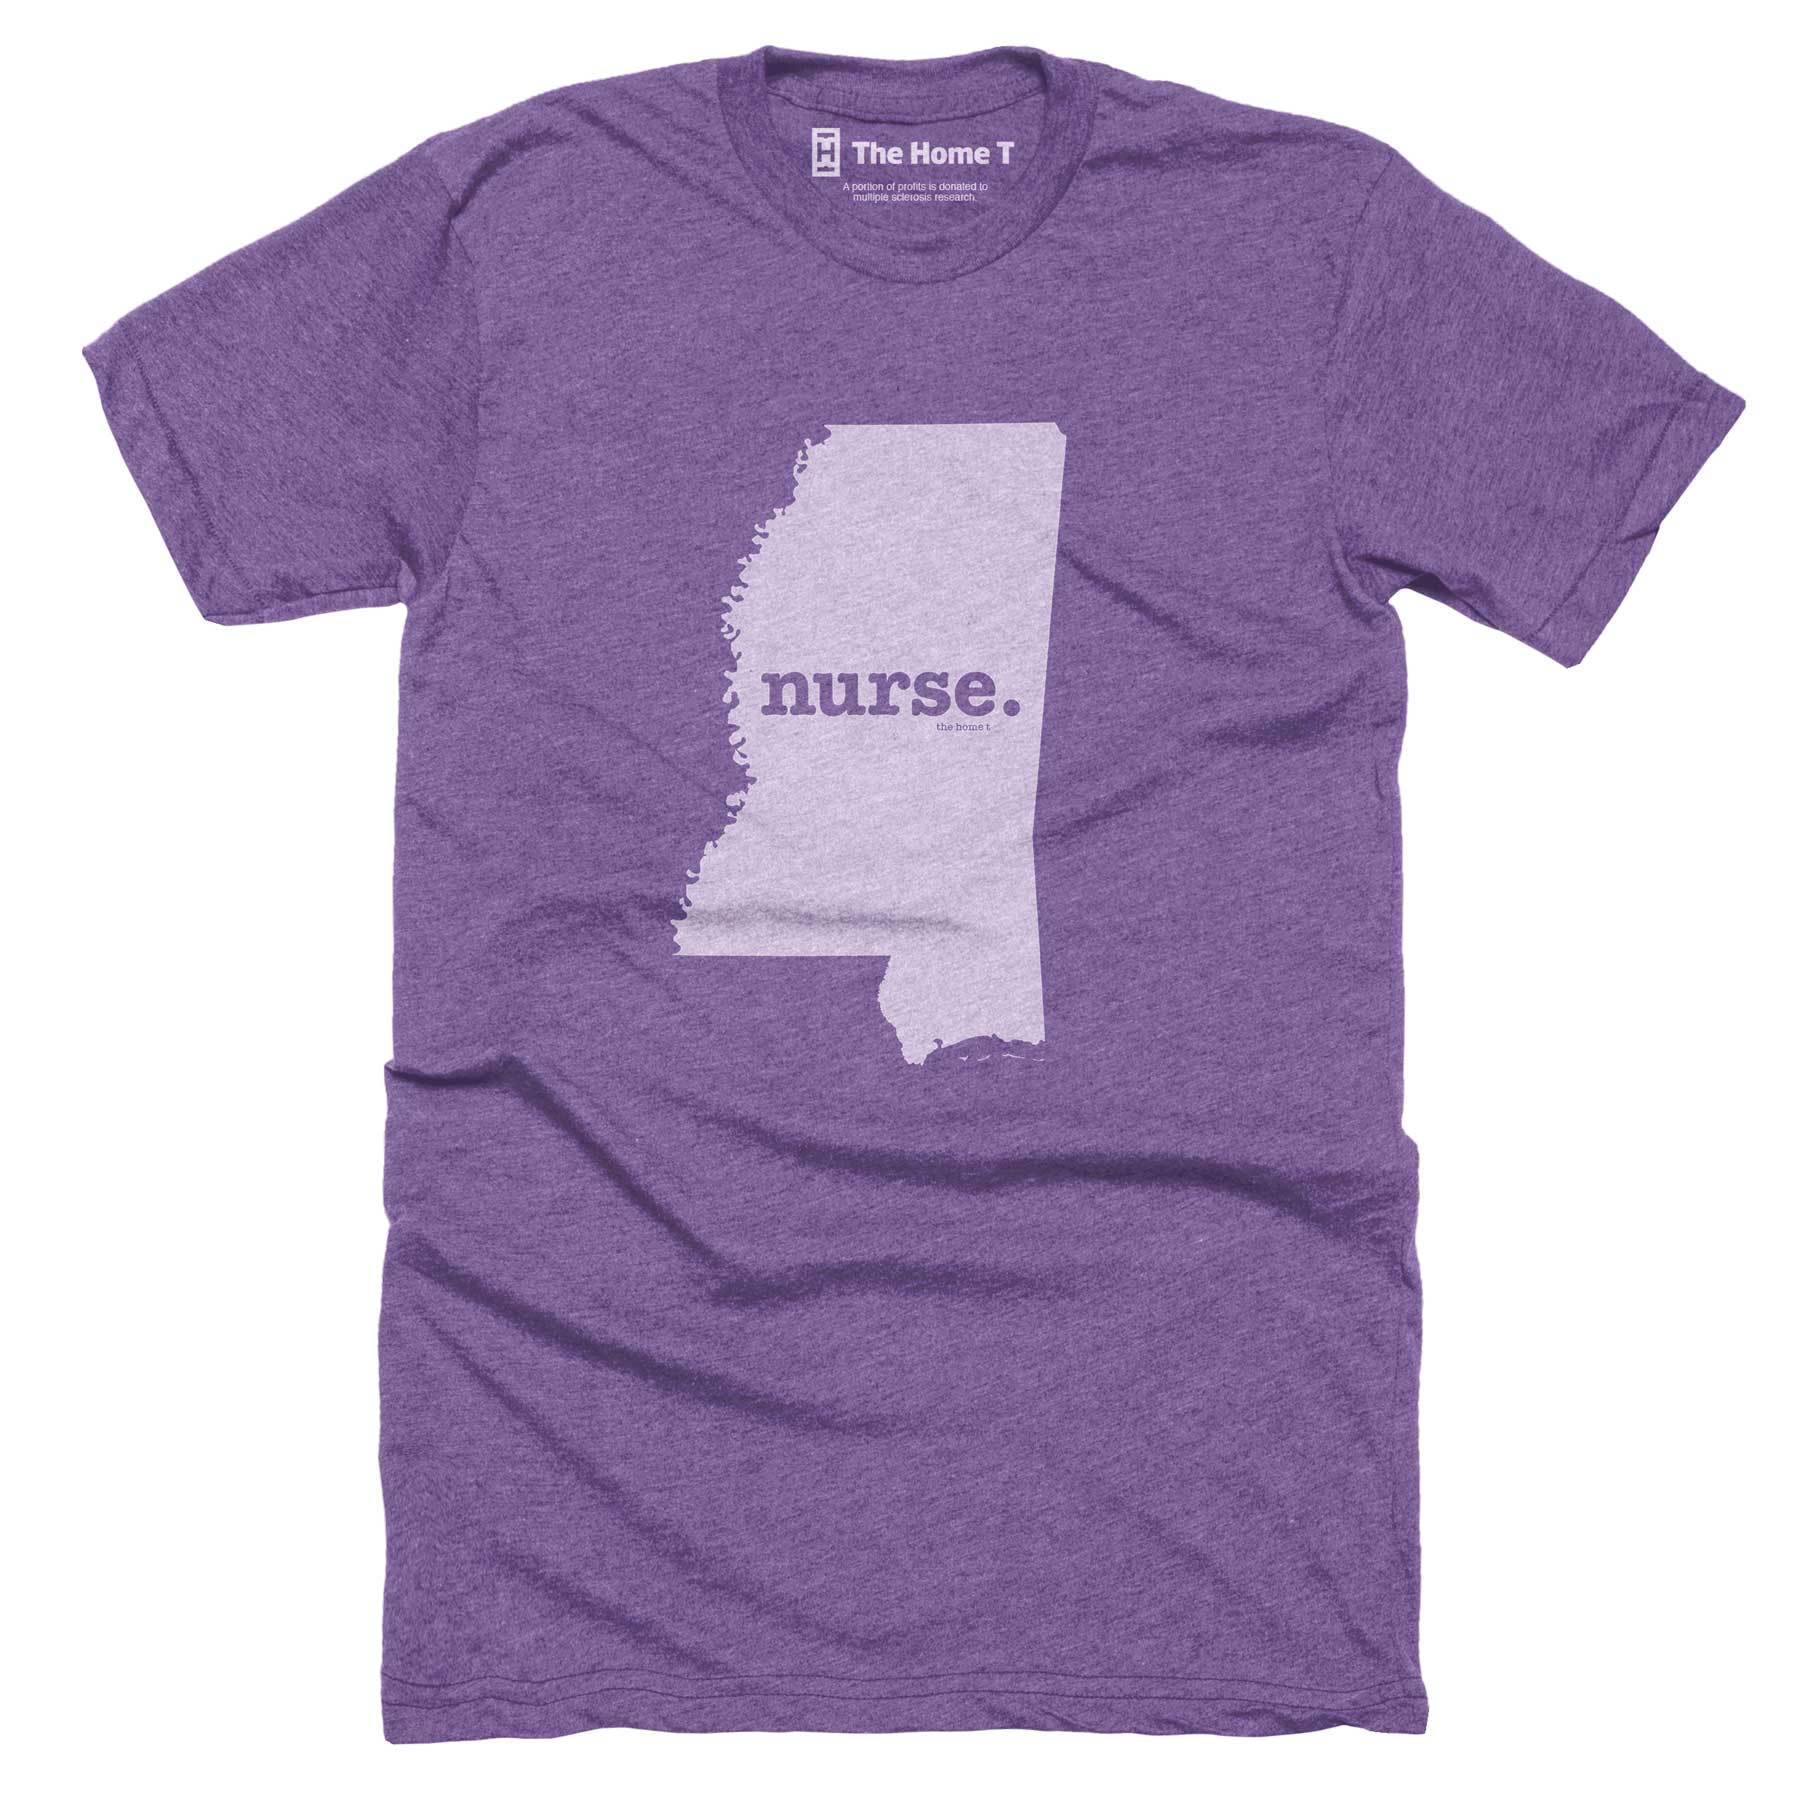 Mississippi Nurse Home T-Shirt Occupation The Home T